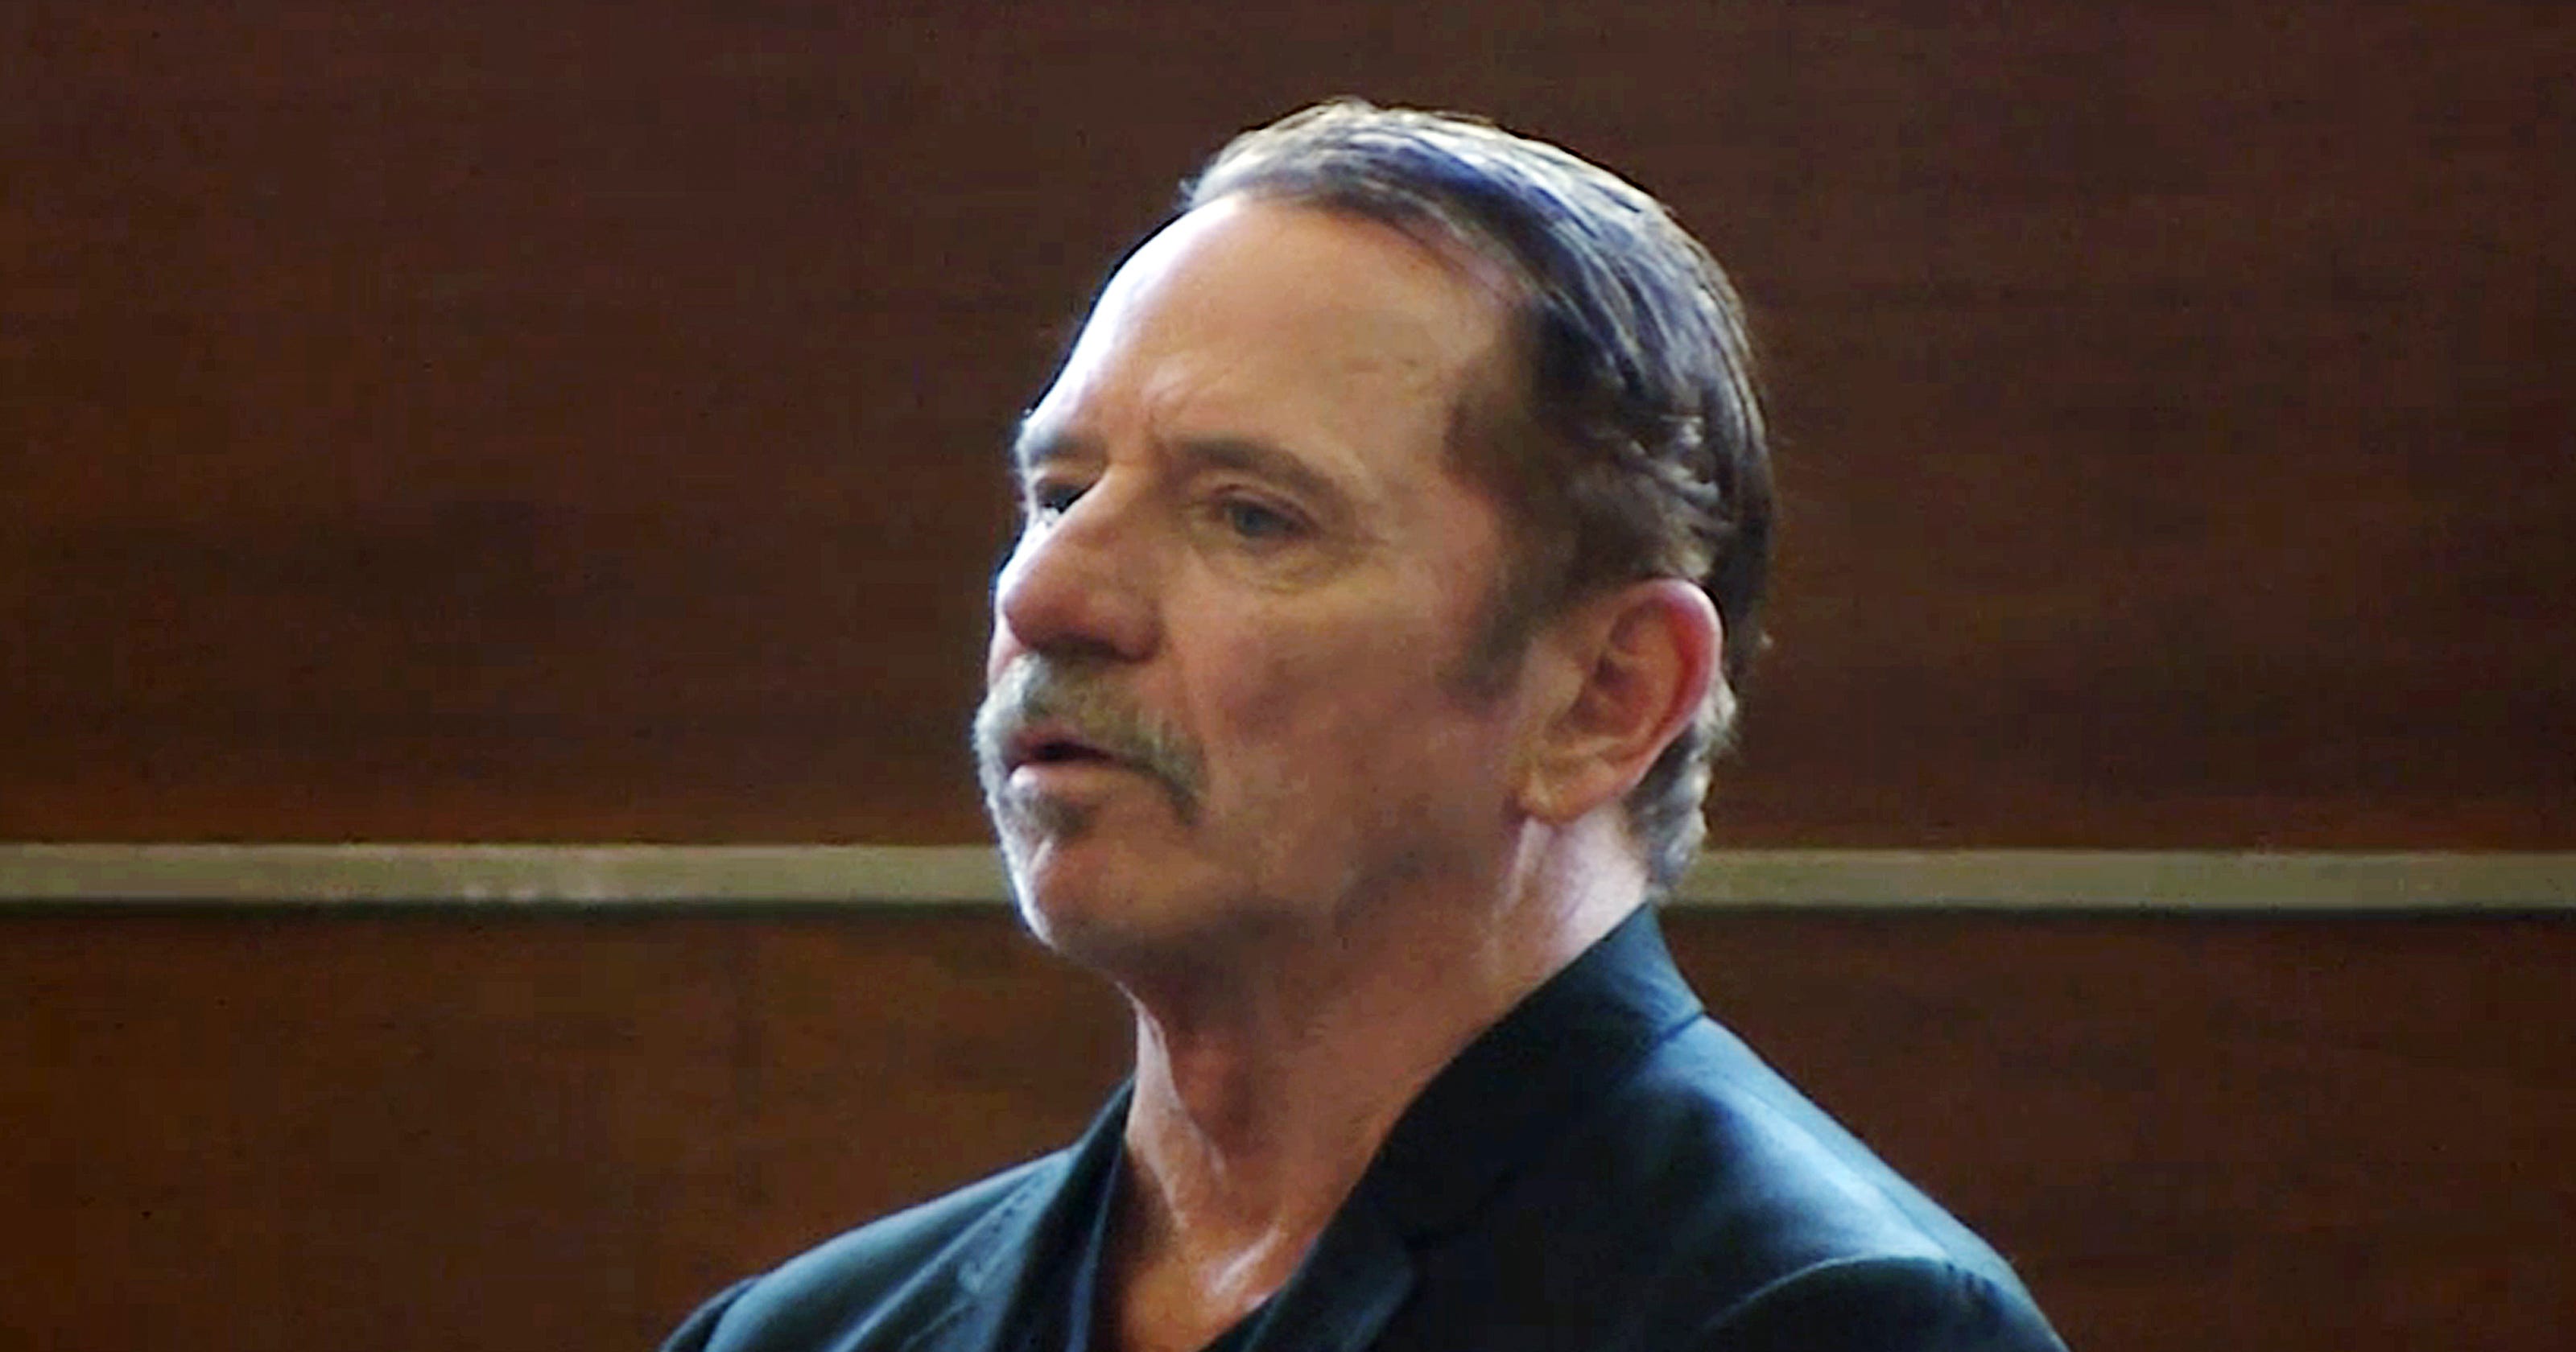 'Dukes of Hazzard' star Tom Wopat pleads guilty to 'annoying' woman